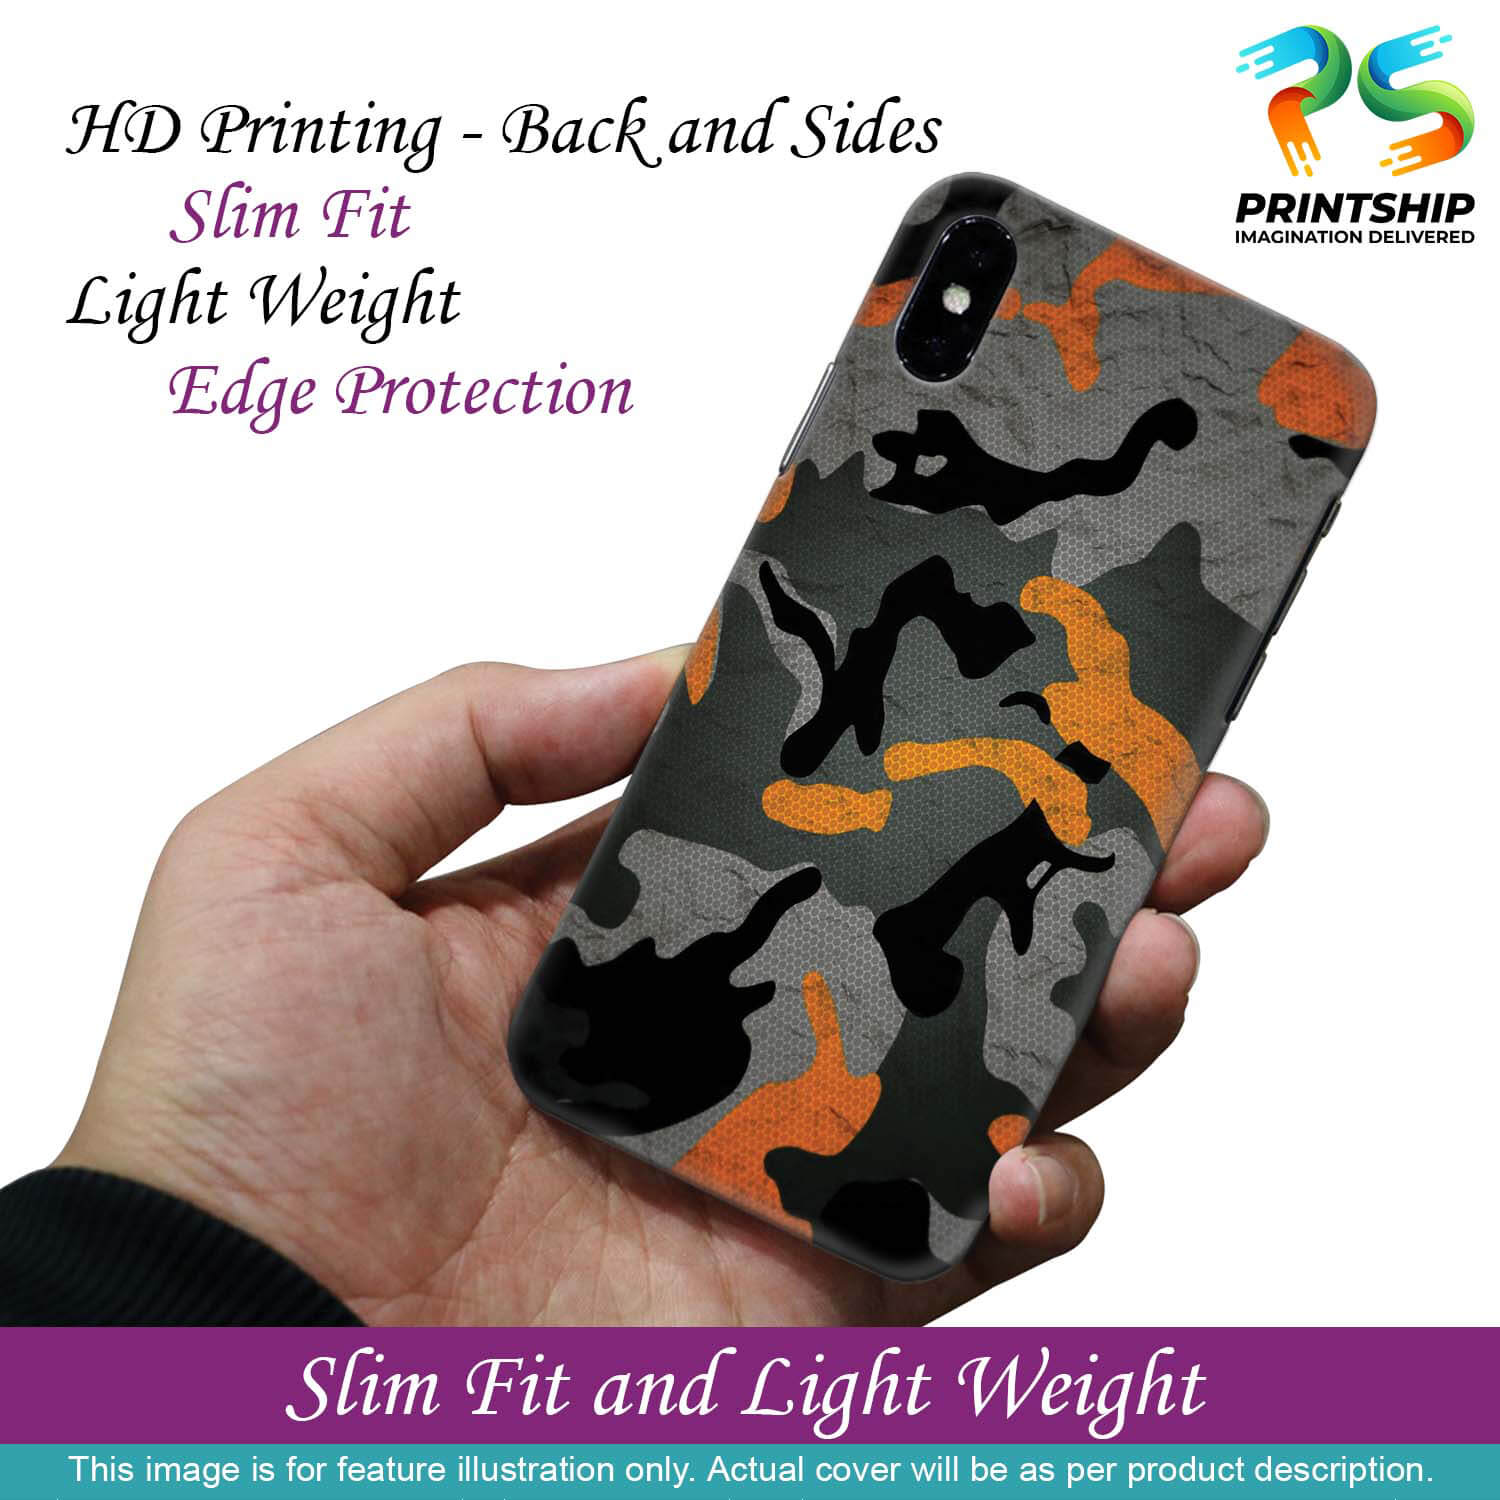 PS1337-Premium Looking Camouflage Back Cover for Apple iPhone XS Max